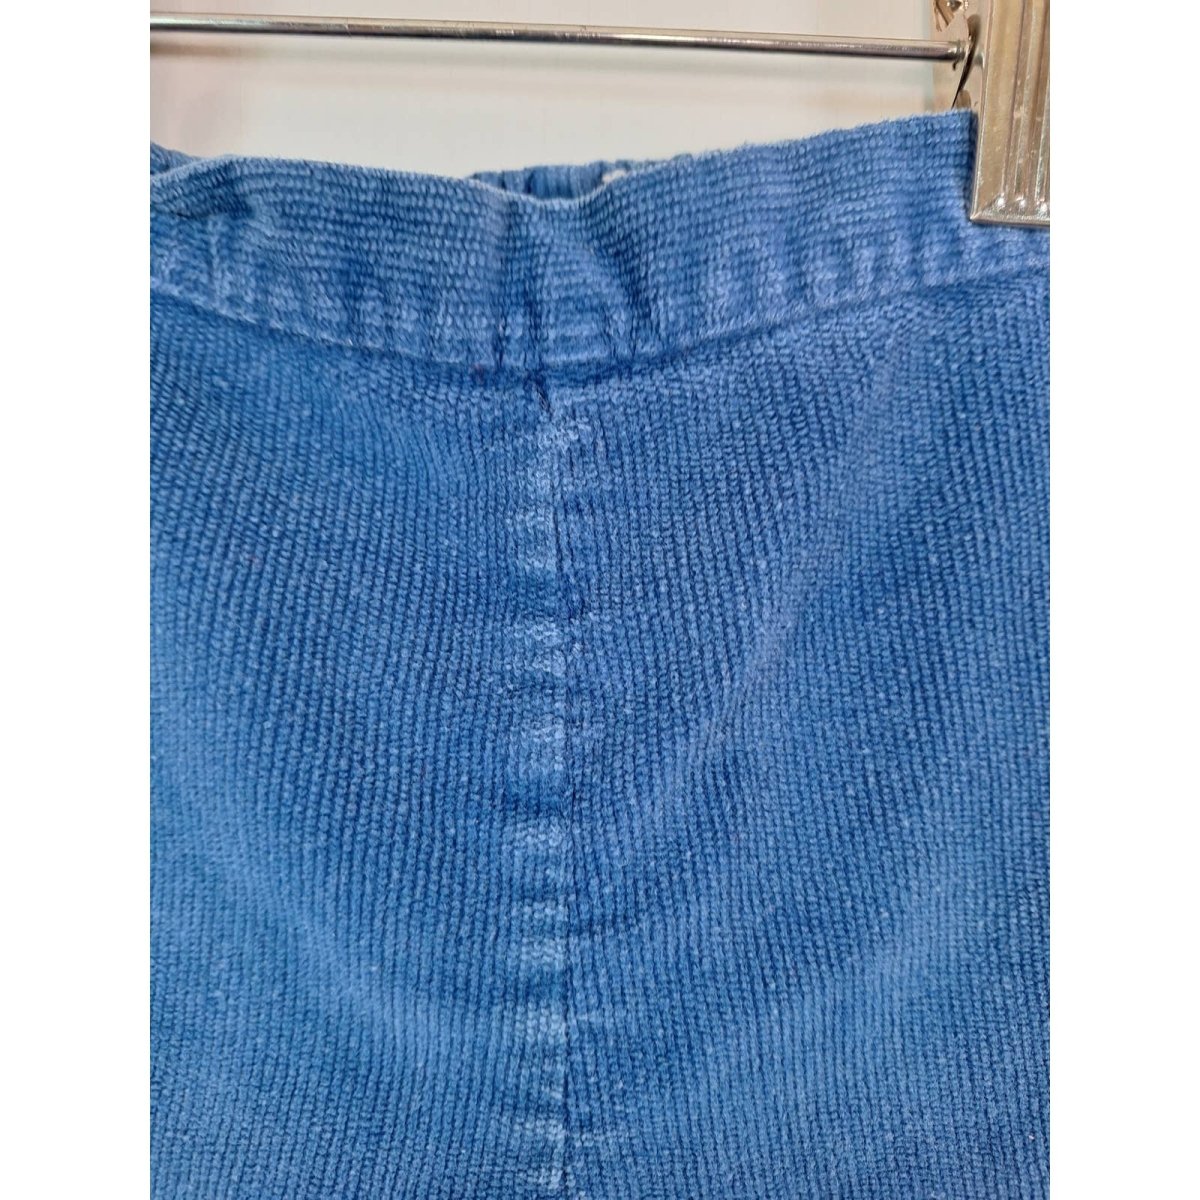 Vintage 70s Toddler Dusty Blue Corduroy Pants 2T - themallvintage The Mall Vintage